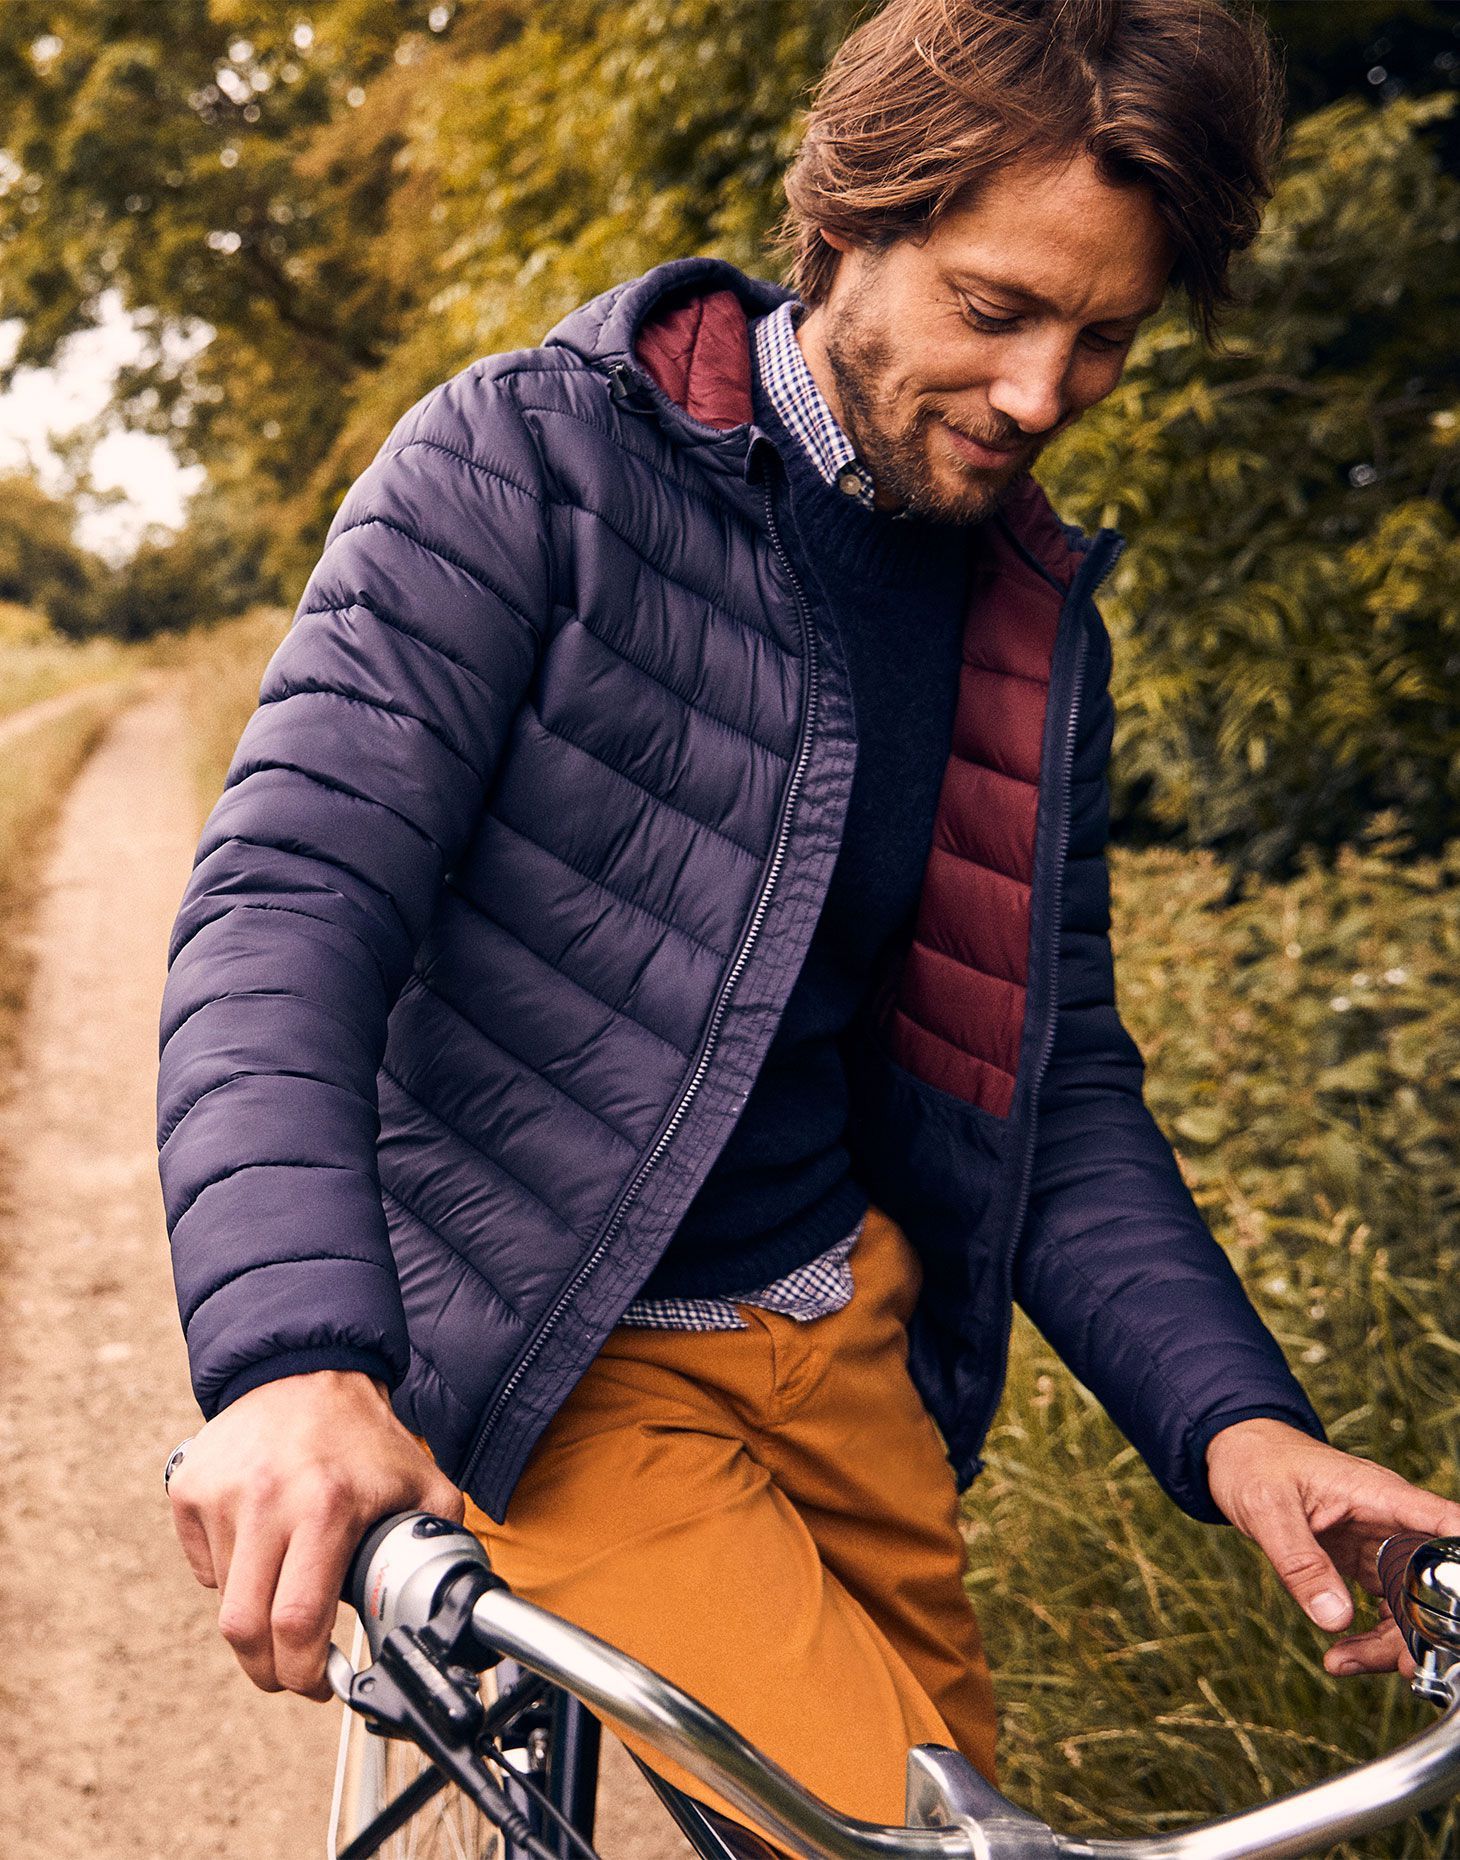 How To Wear Quilted Jackets? 30 Best Outfit Ideas for Men